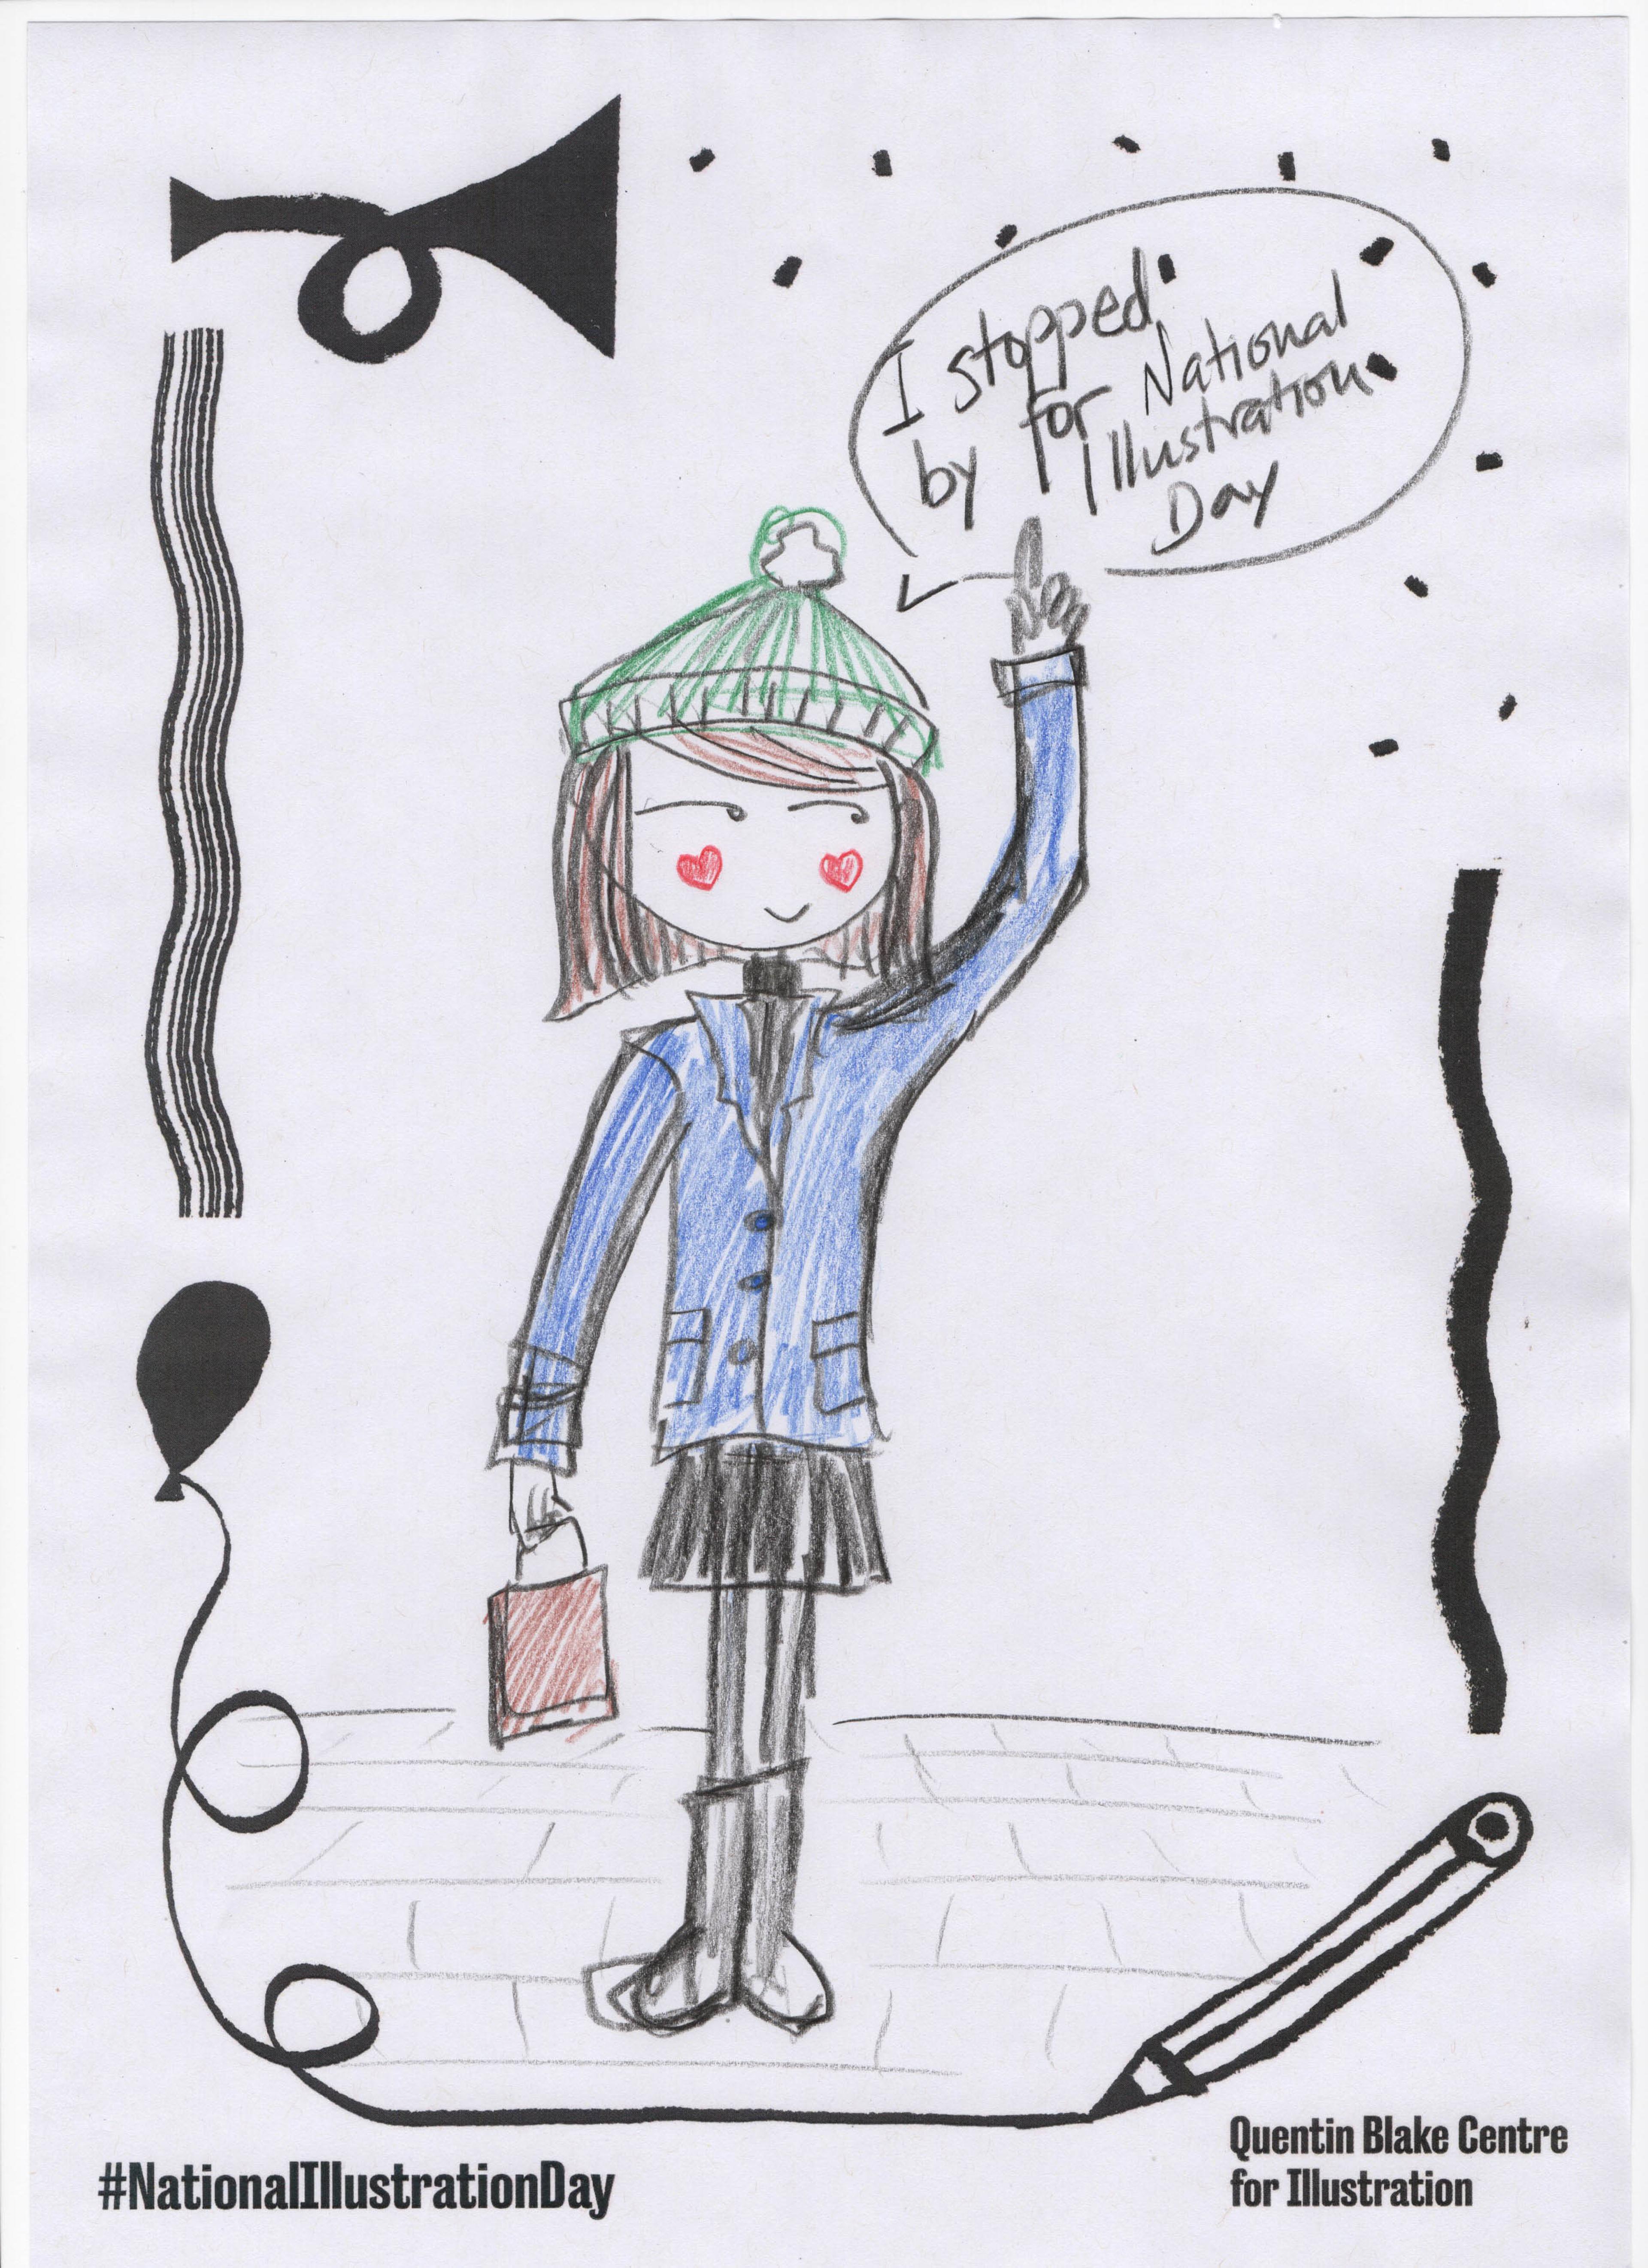 Illustration of a person with a speech bubble saying "I stopped by for National Illustration Day".